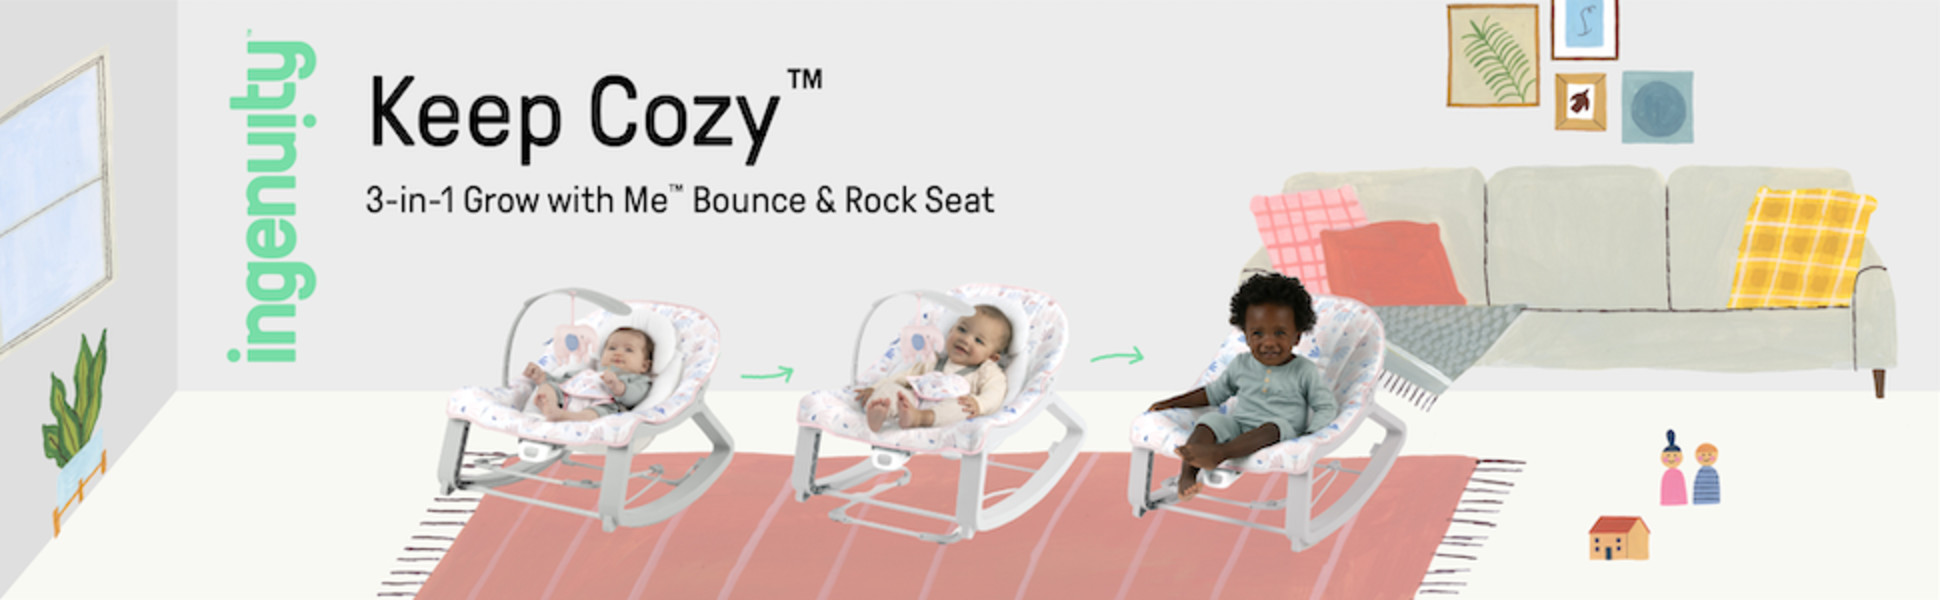 Keep Cozy 3-in-1 Grow with Me Bounce & Rock Seat - Spruce – Kids2, LLC